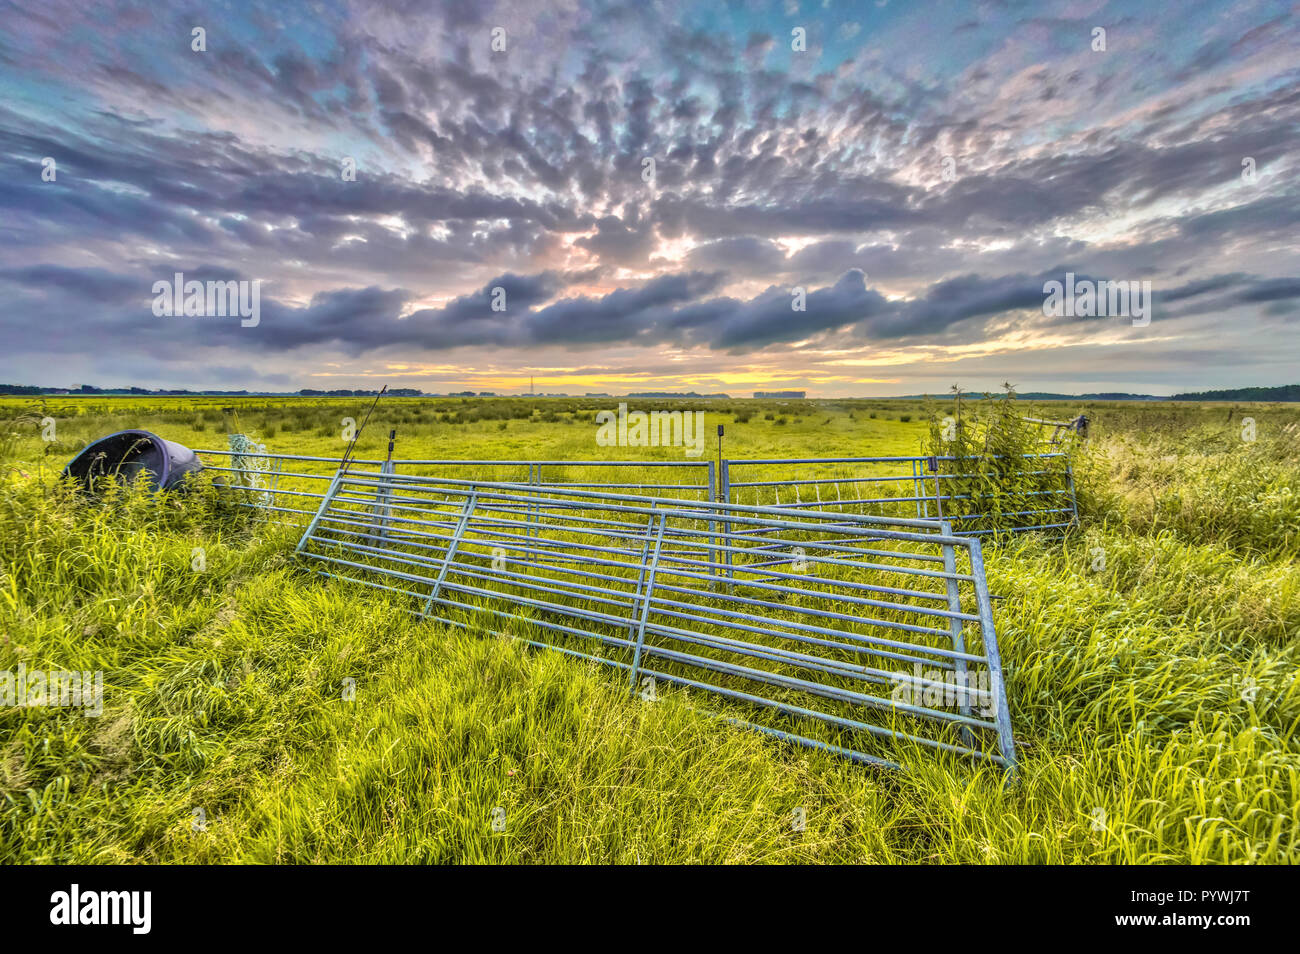 Metal gates in farmland field under setting sun with beautiful clouded sky Stock Photo